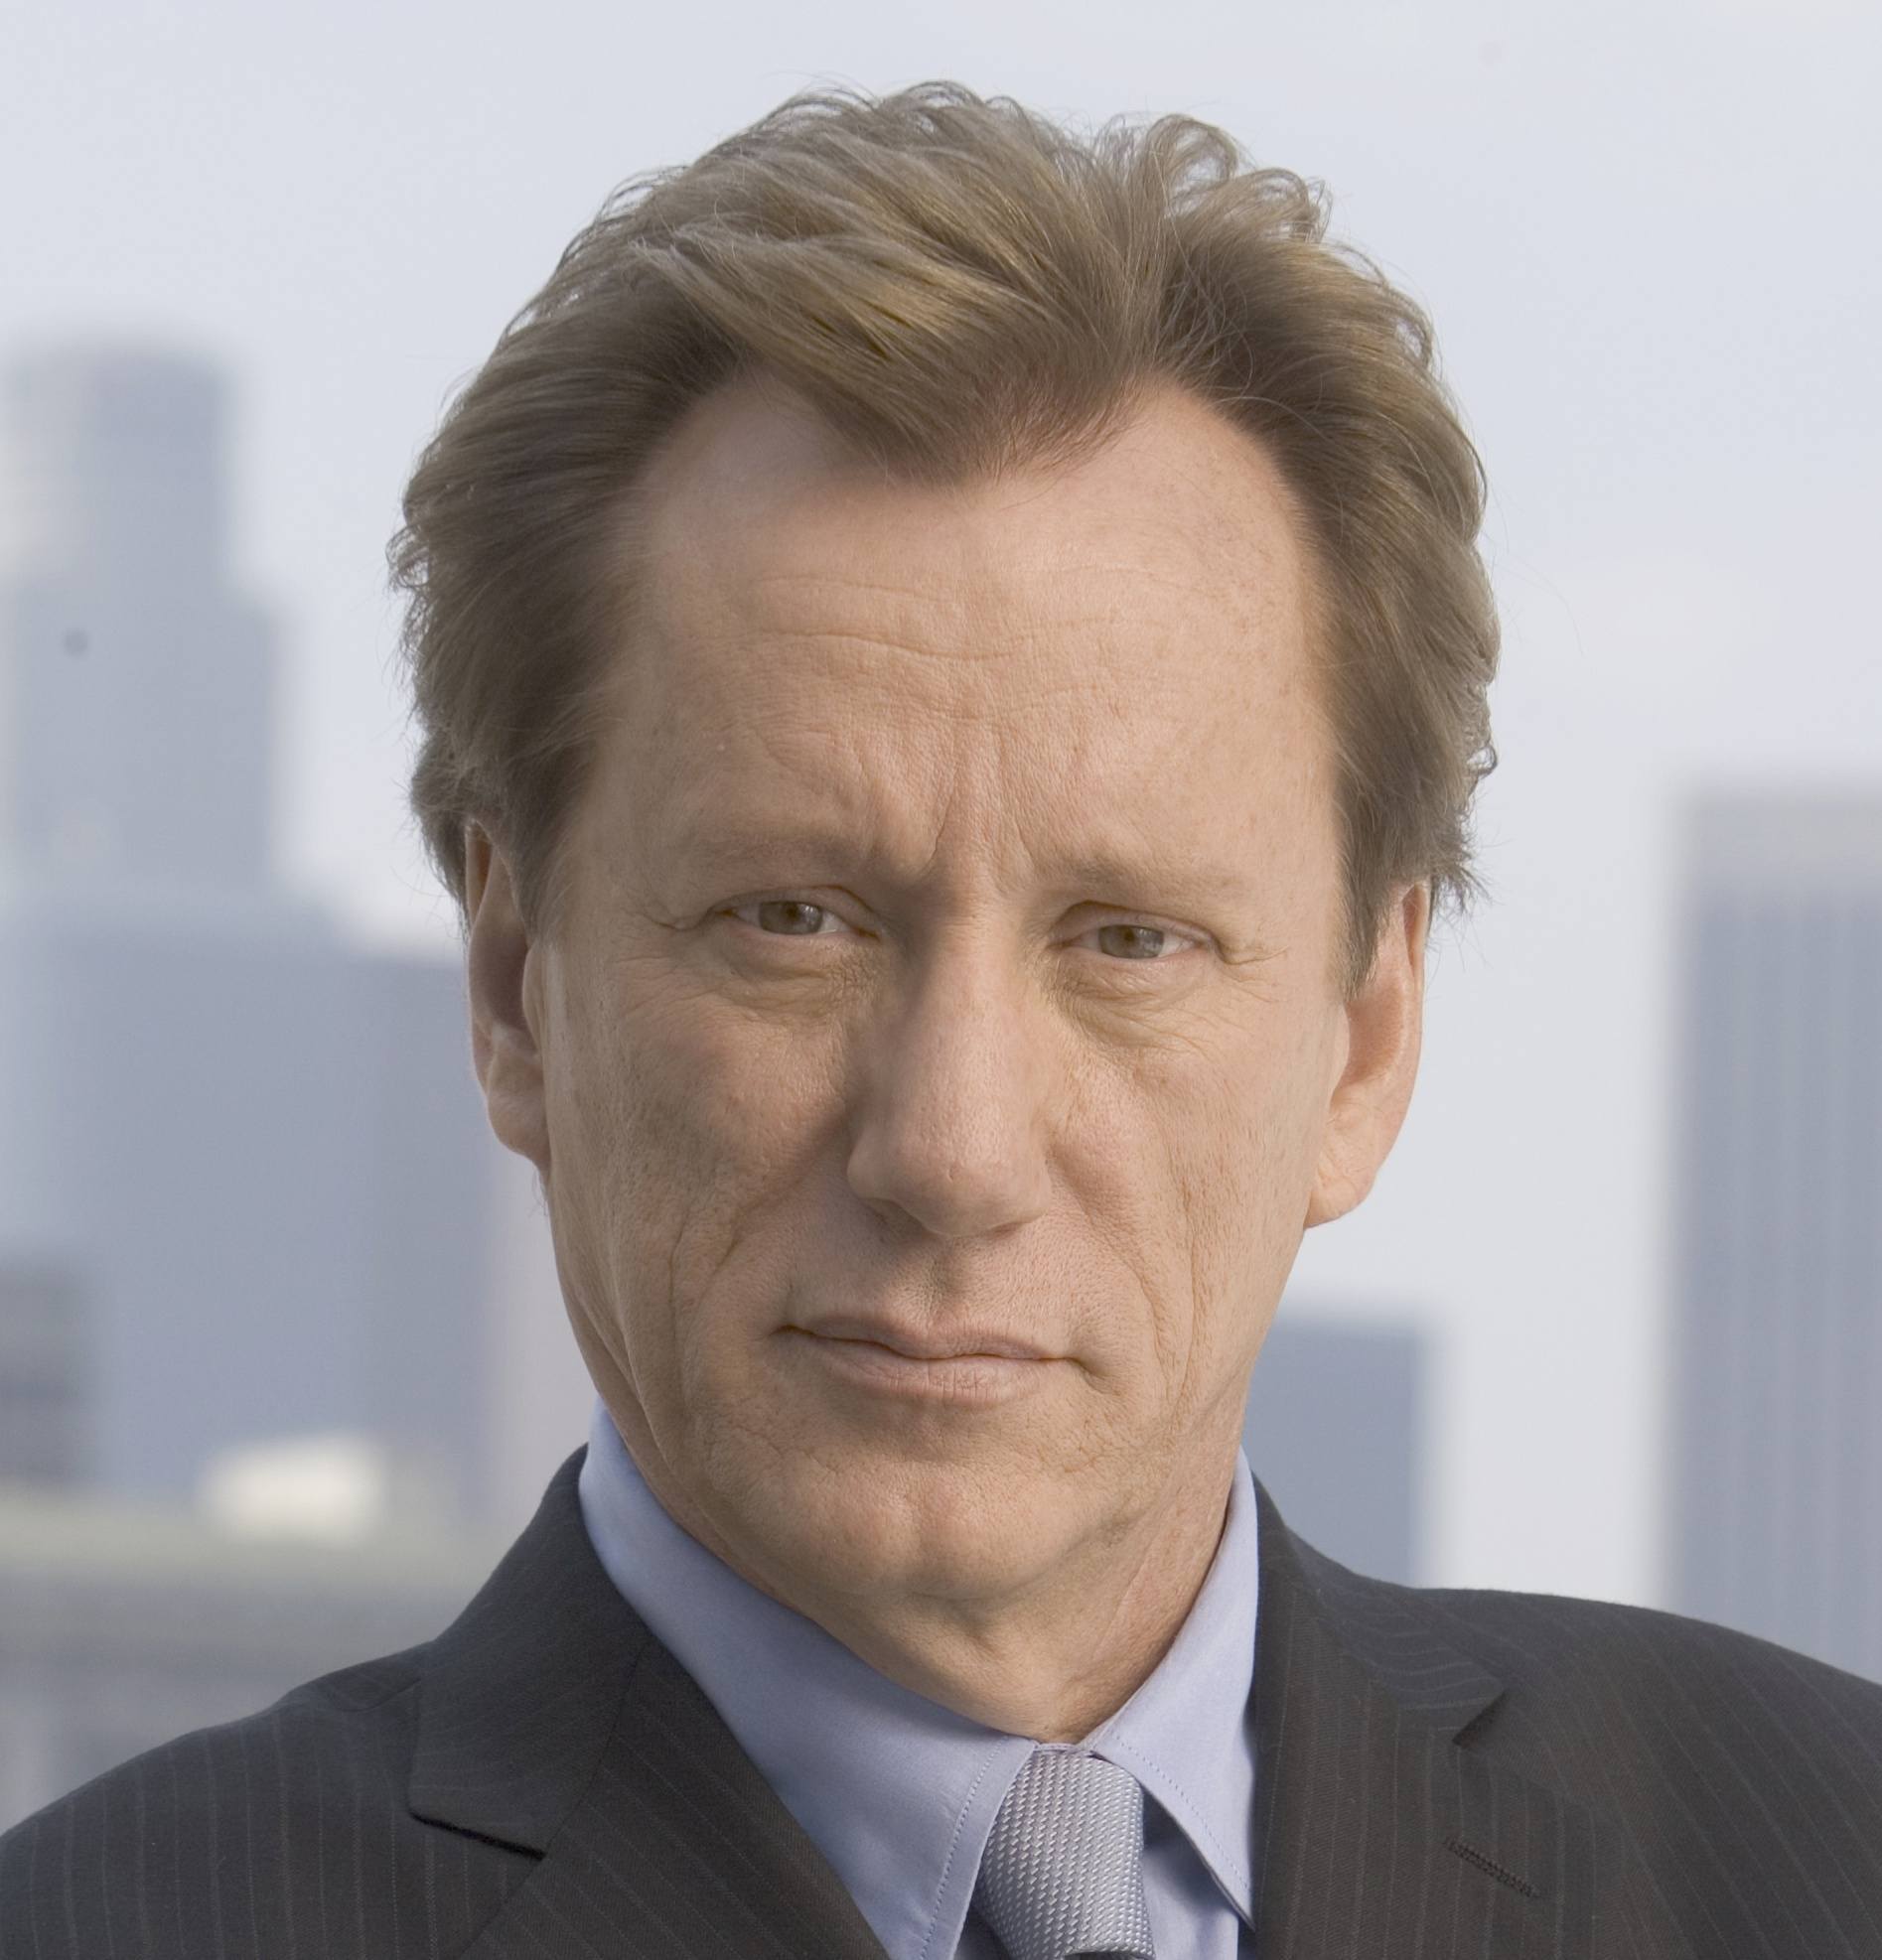 Poker-Playing Firebrand James Woods Locked Out of Twitter for Sharing Fake News